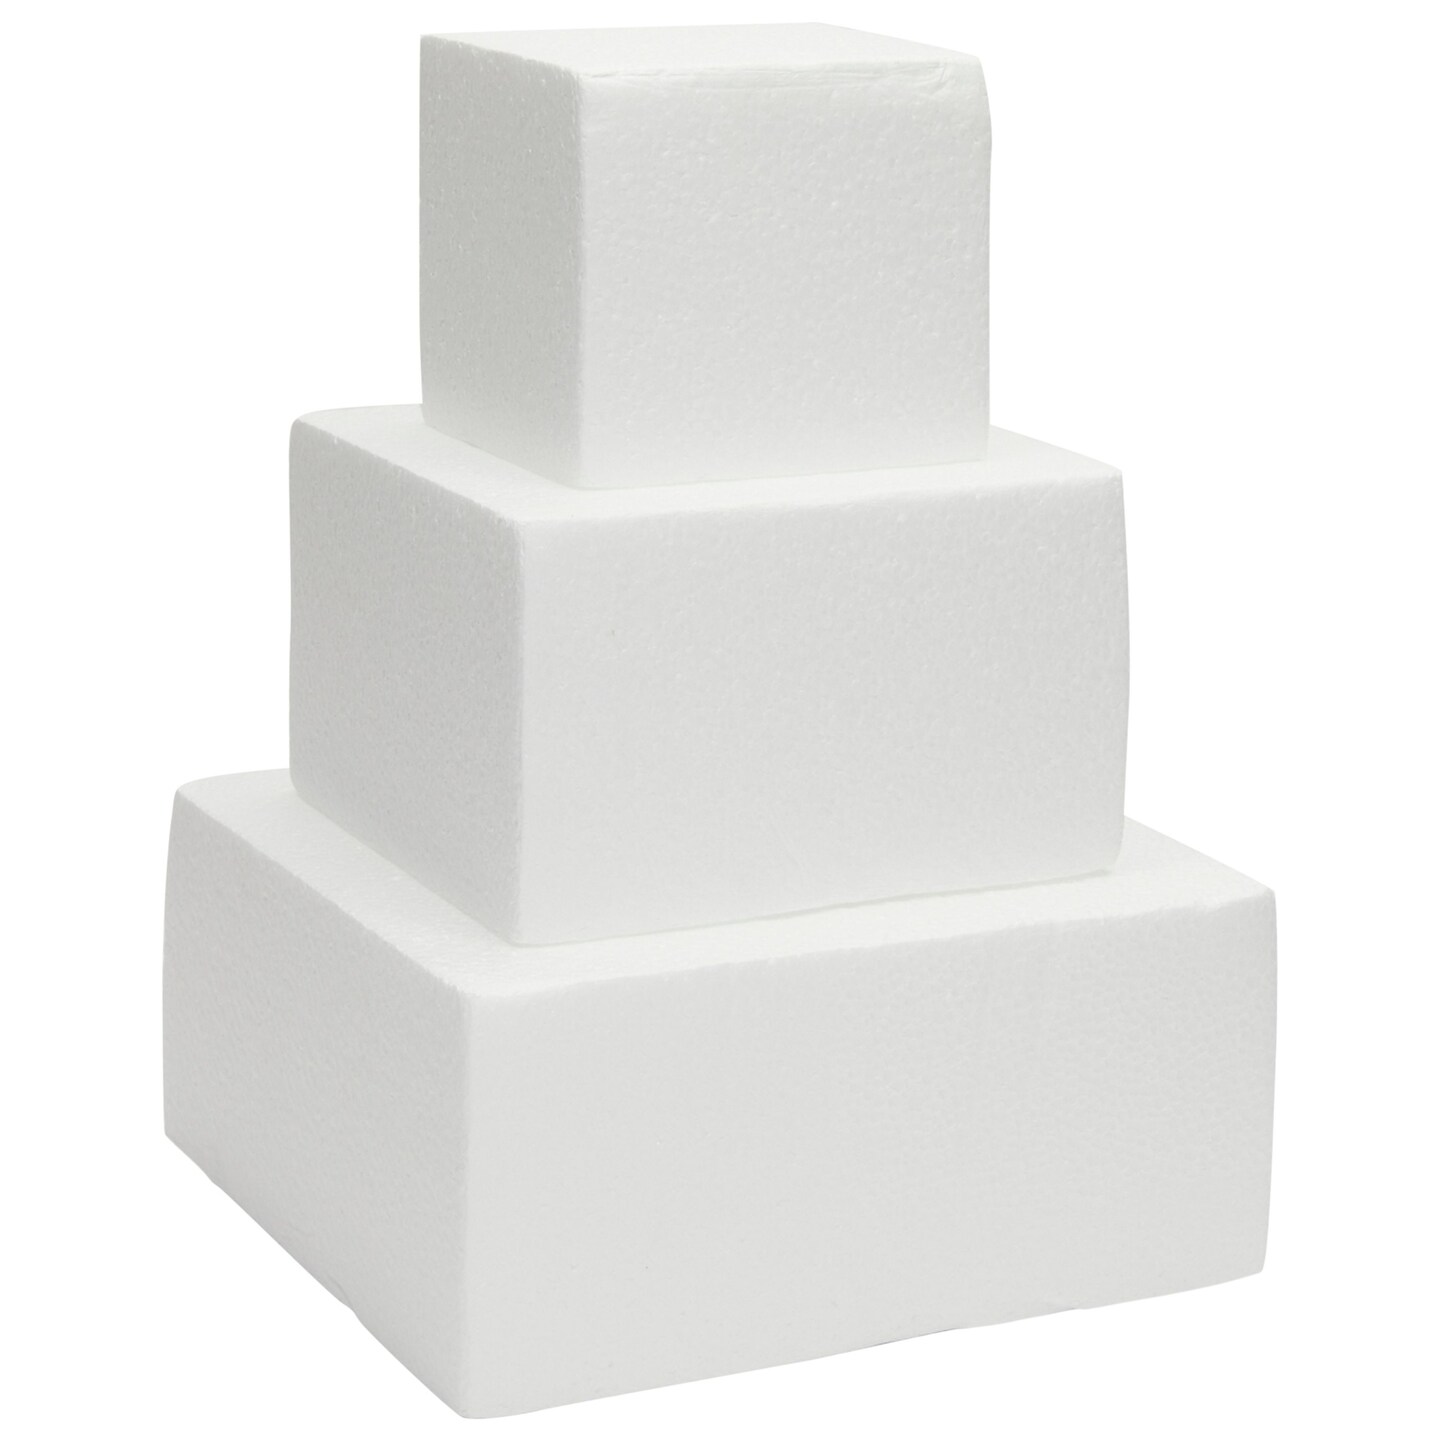 Small Square Foam Cake Dummy for Decorating and Wedding Display, 3 Tiers  (10.8 Inches Tall)